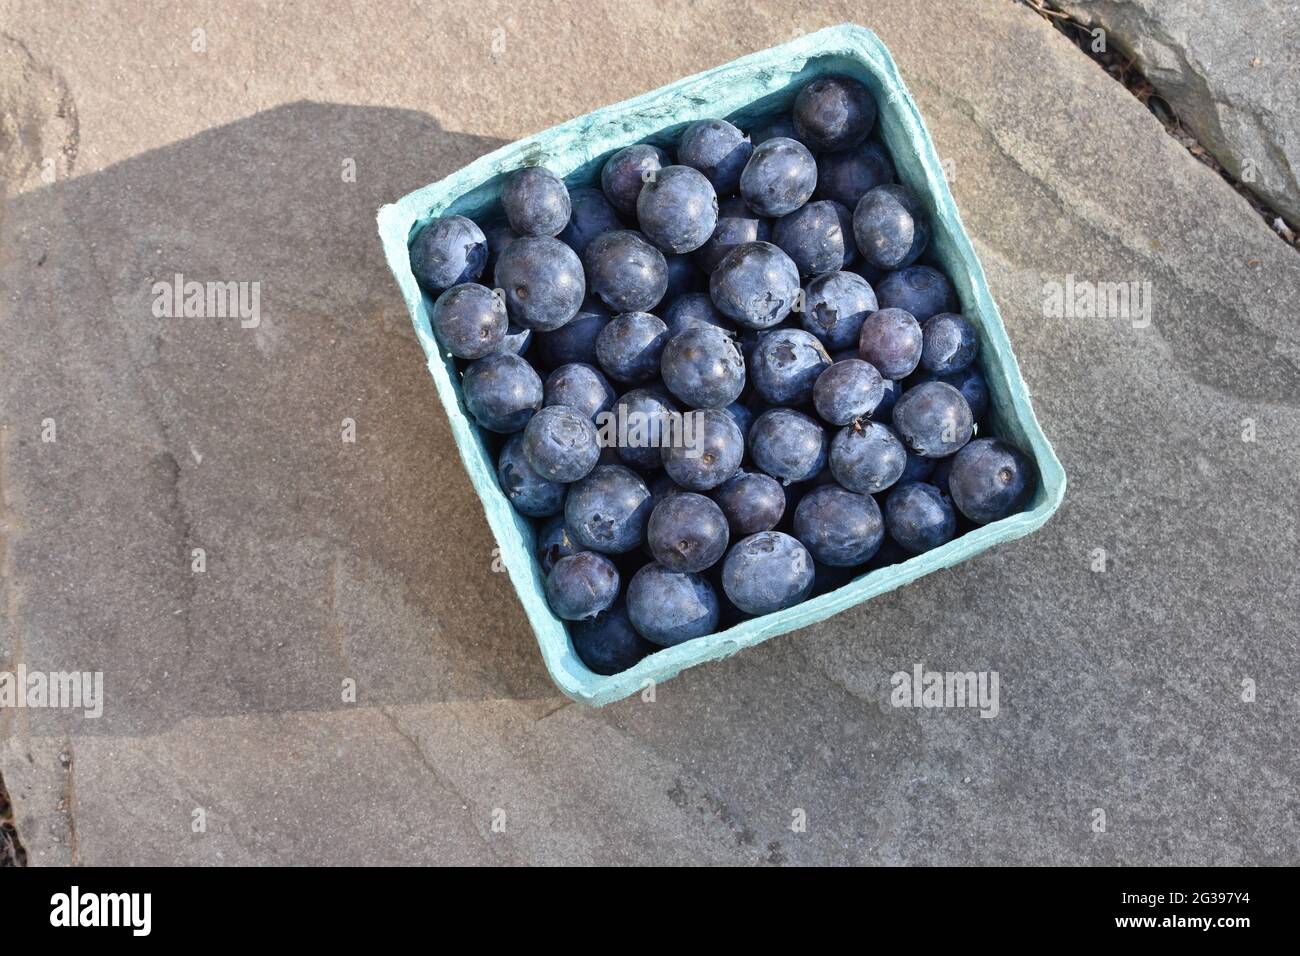 Closeup of a pint box of blueberries on a grey slate background with evening light casting a shadow. Copy space. Stock Photo